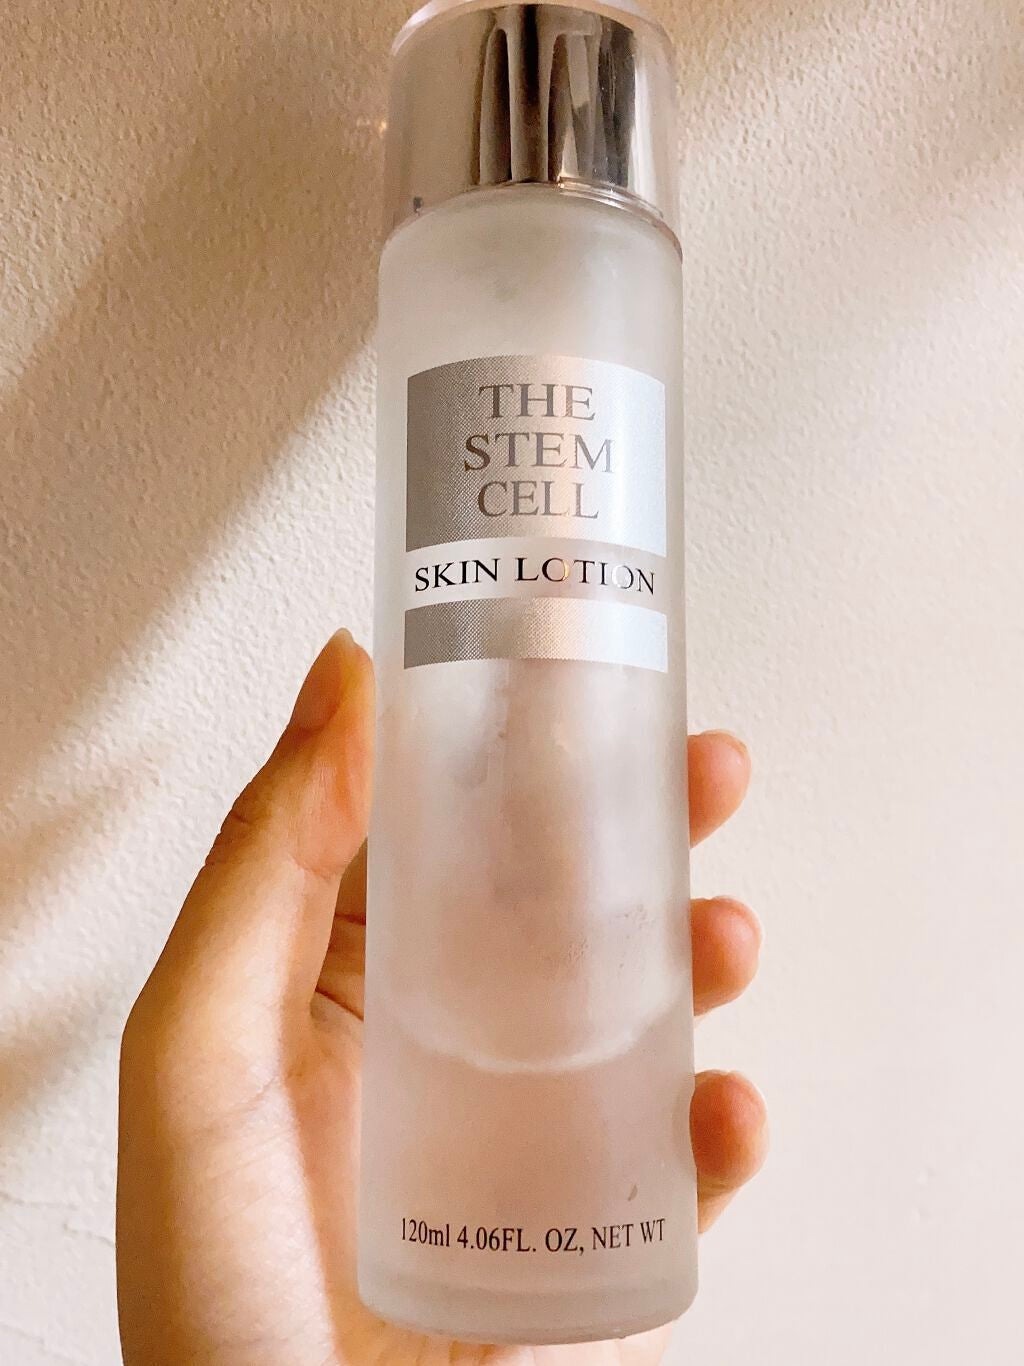 SKIN LOTION (化粧水)｜THE STEM CELLの辛口レビュー - 定価9800円が ...